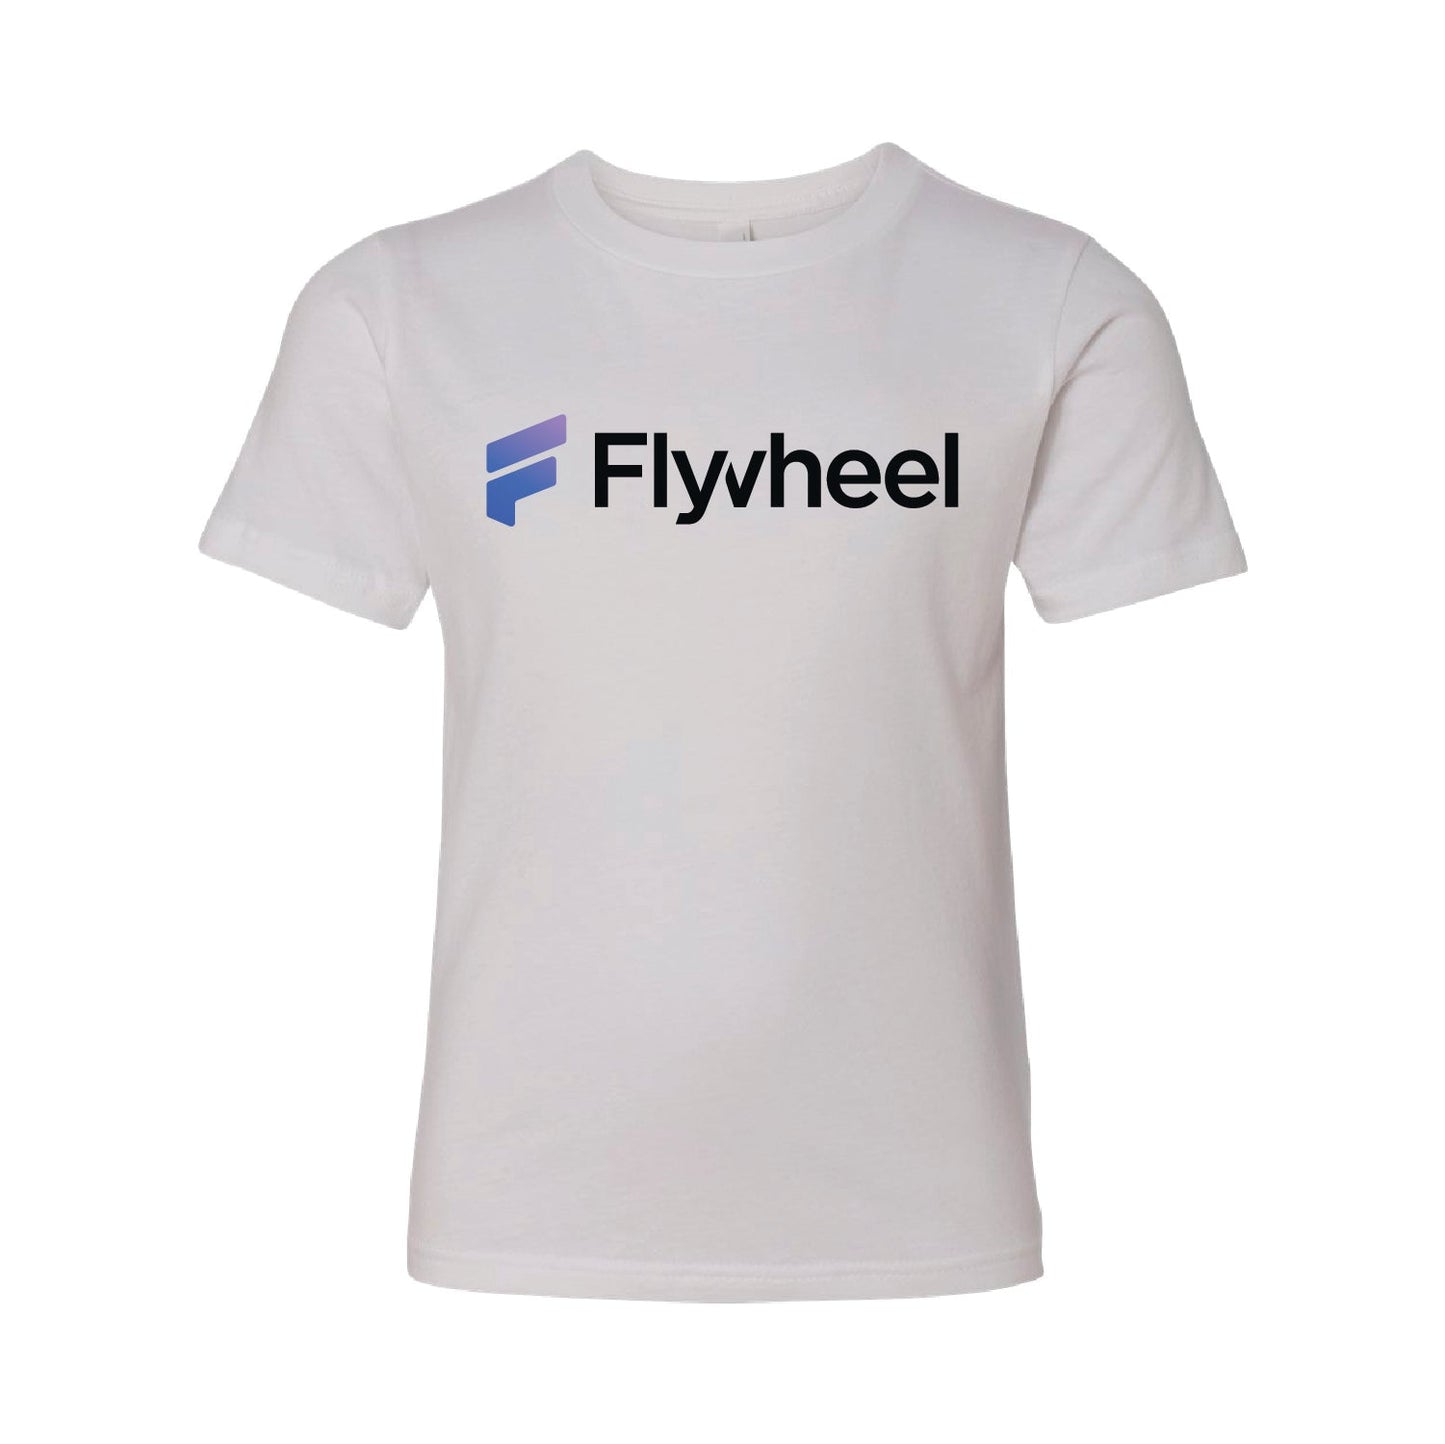 Flywheel Youth Cotton T-Shirt - DSP On Demand